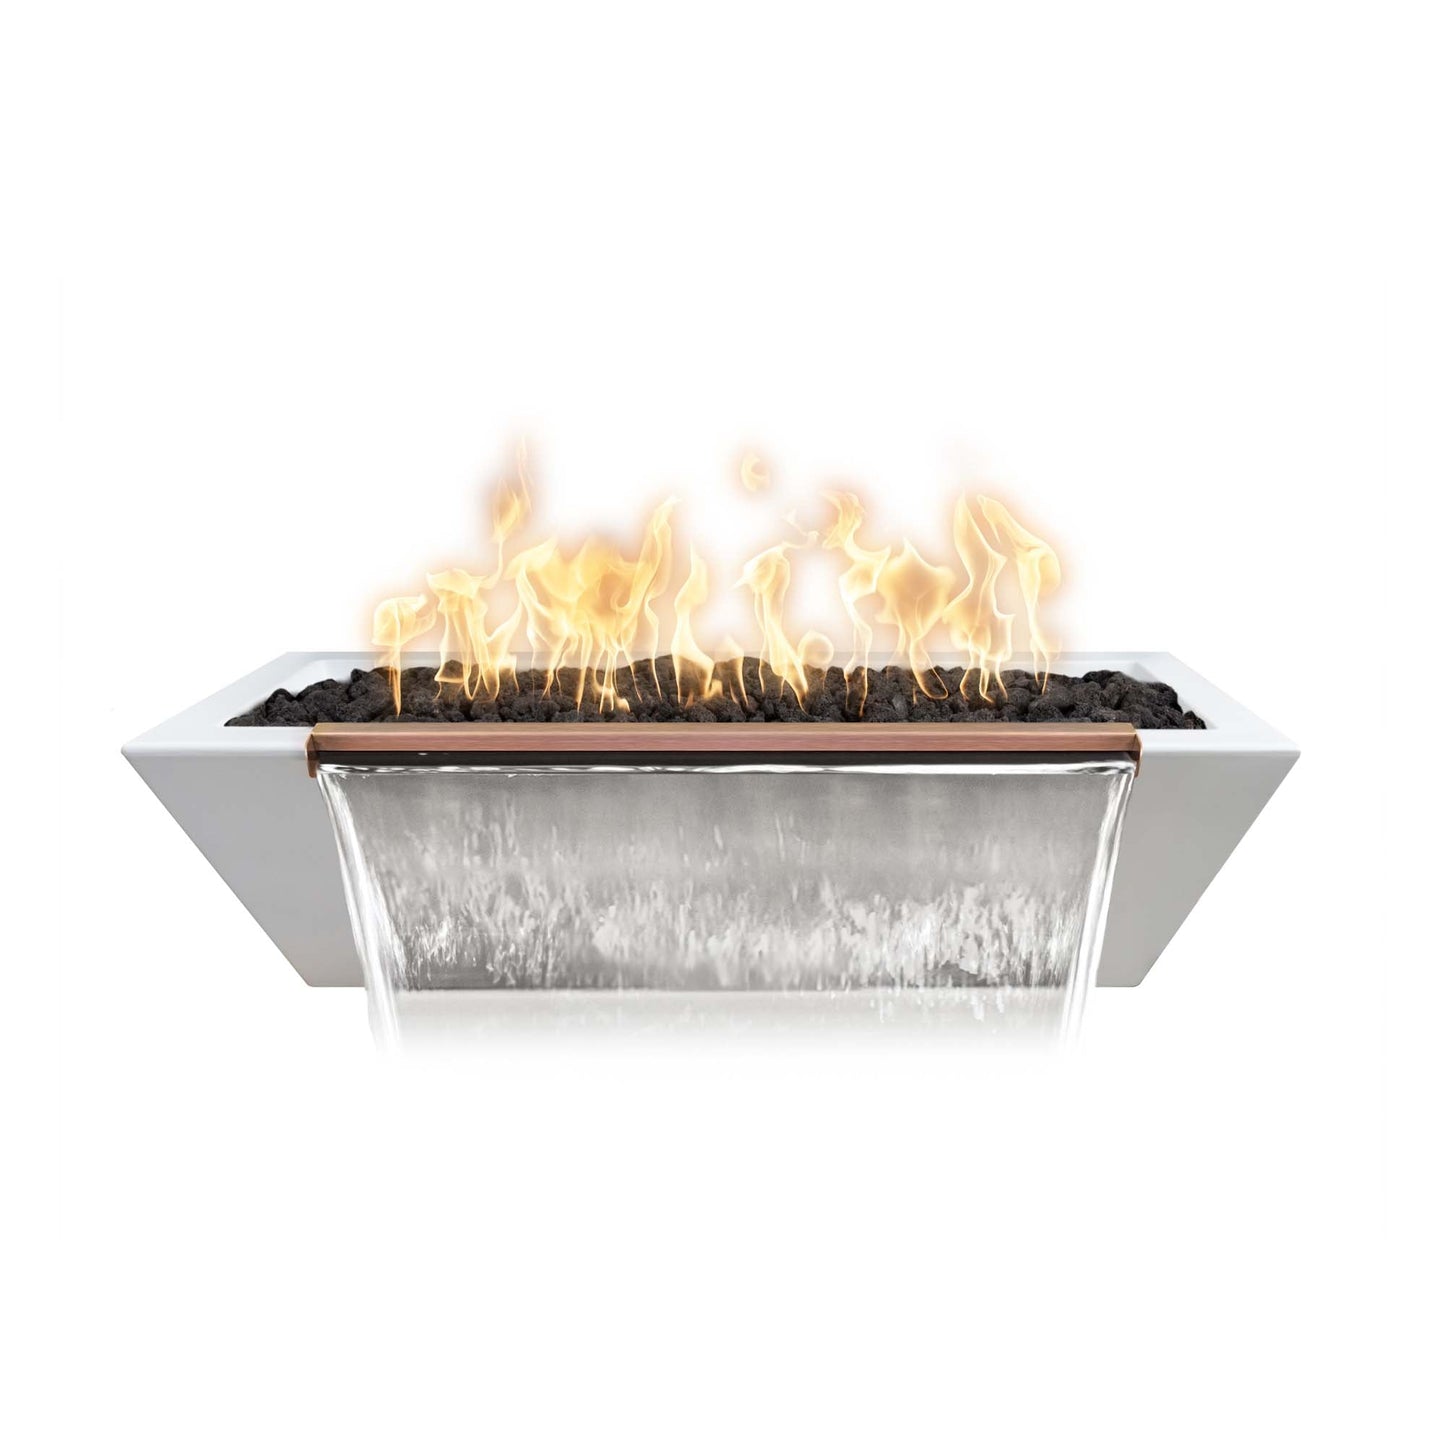 The Outdoor Plus Linear Maya 60" Brown GFRC Concrete Liquid Propane Fire & Water Bowl with Match Lit with Flame Sense Ignition